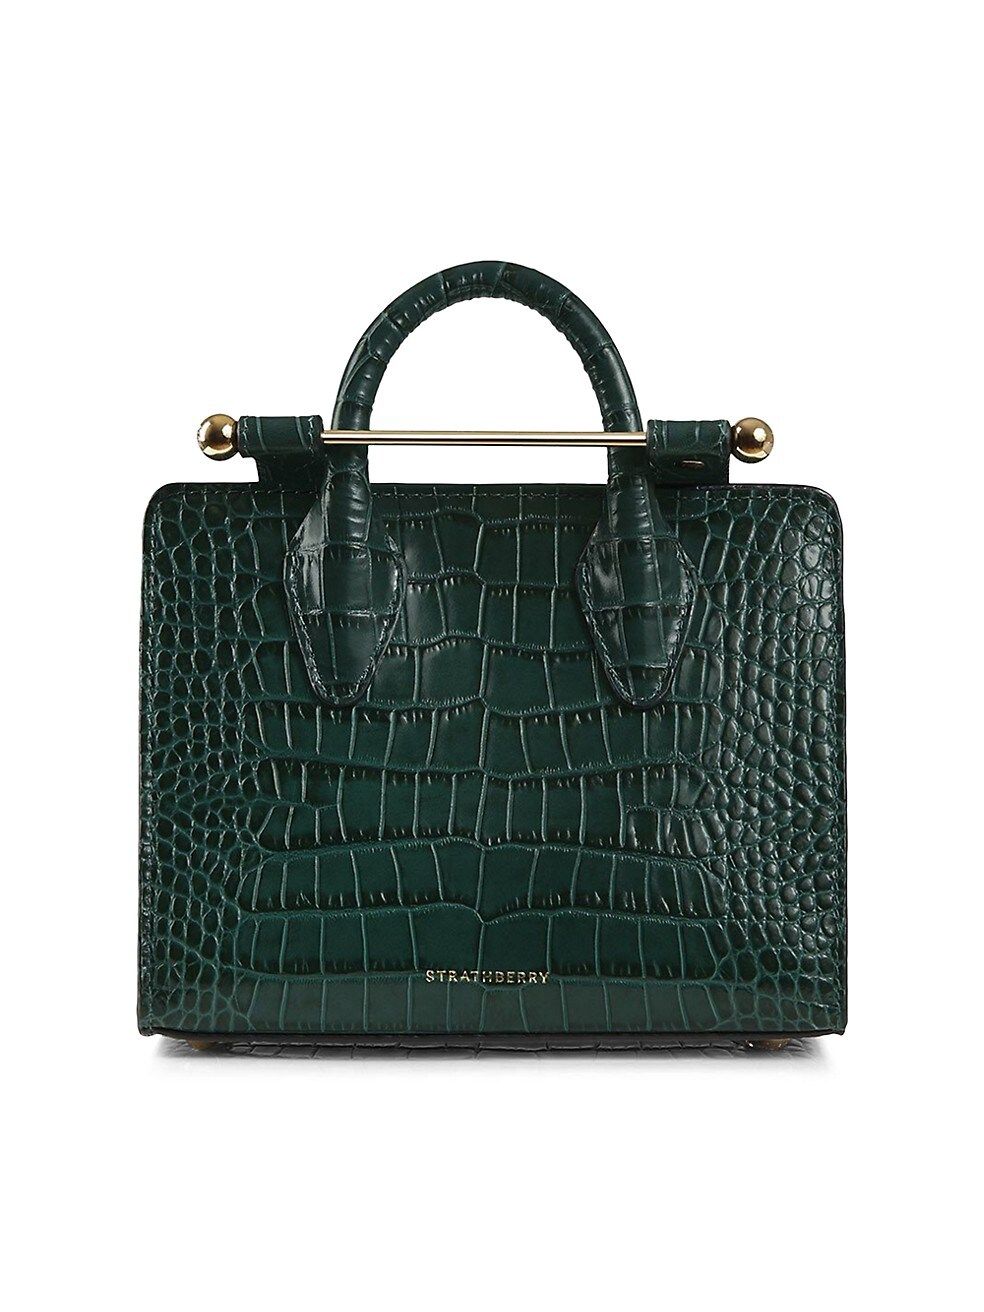 Strathberry Nano Croc-Embossed Leather Tote | Saks Fifth Avenue